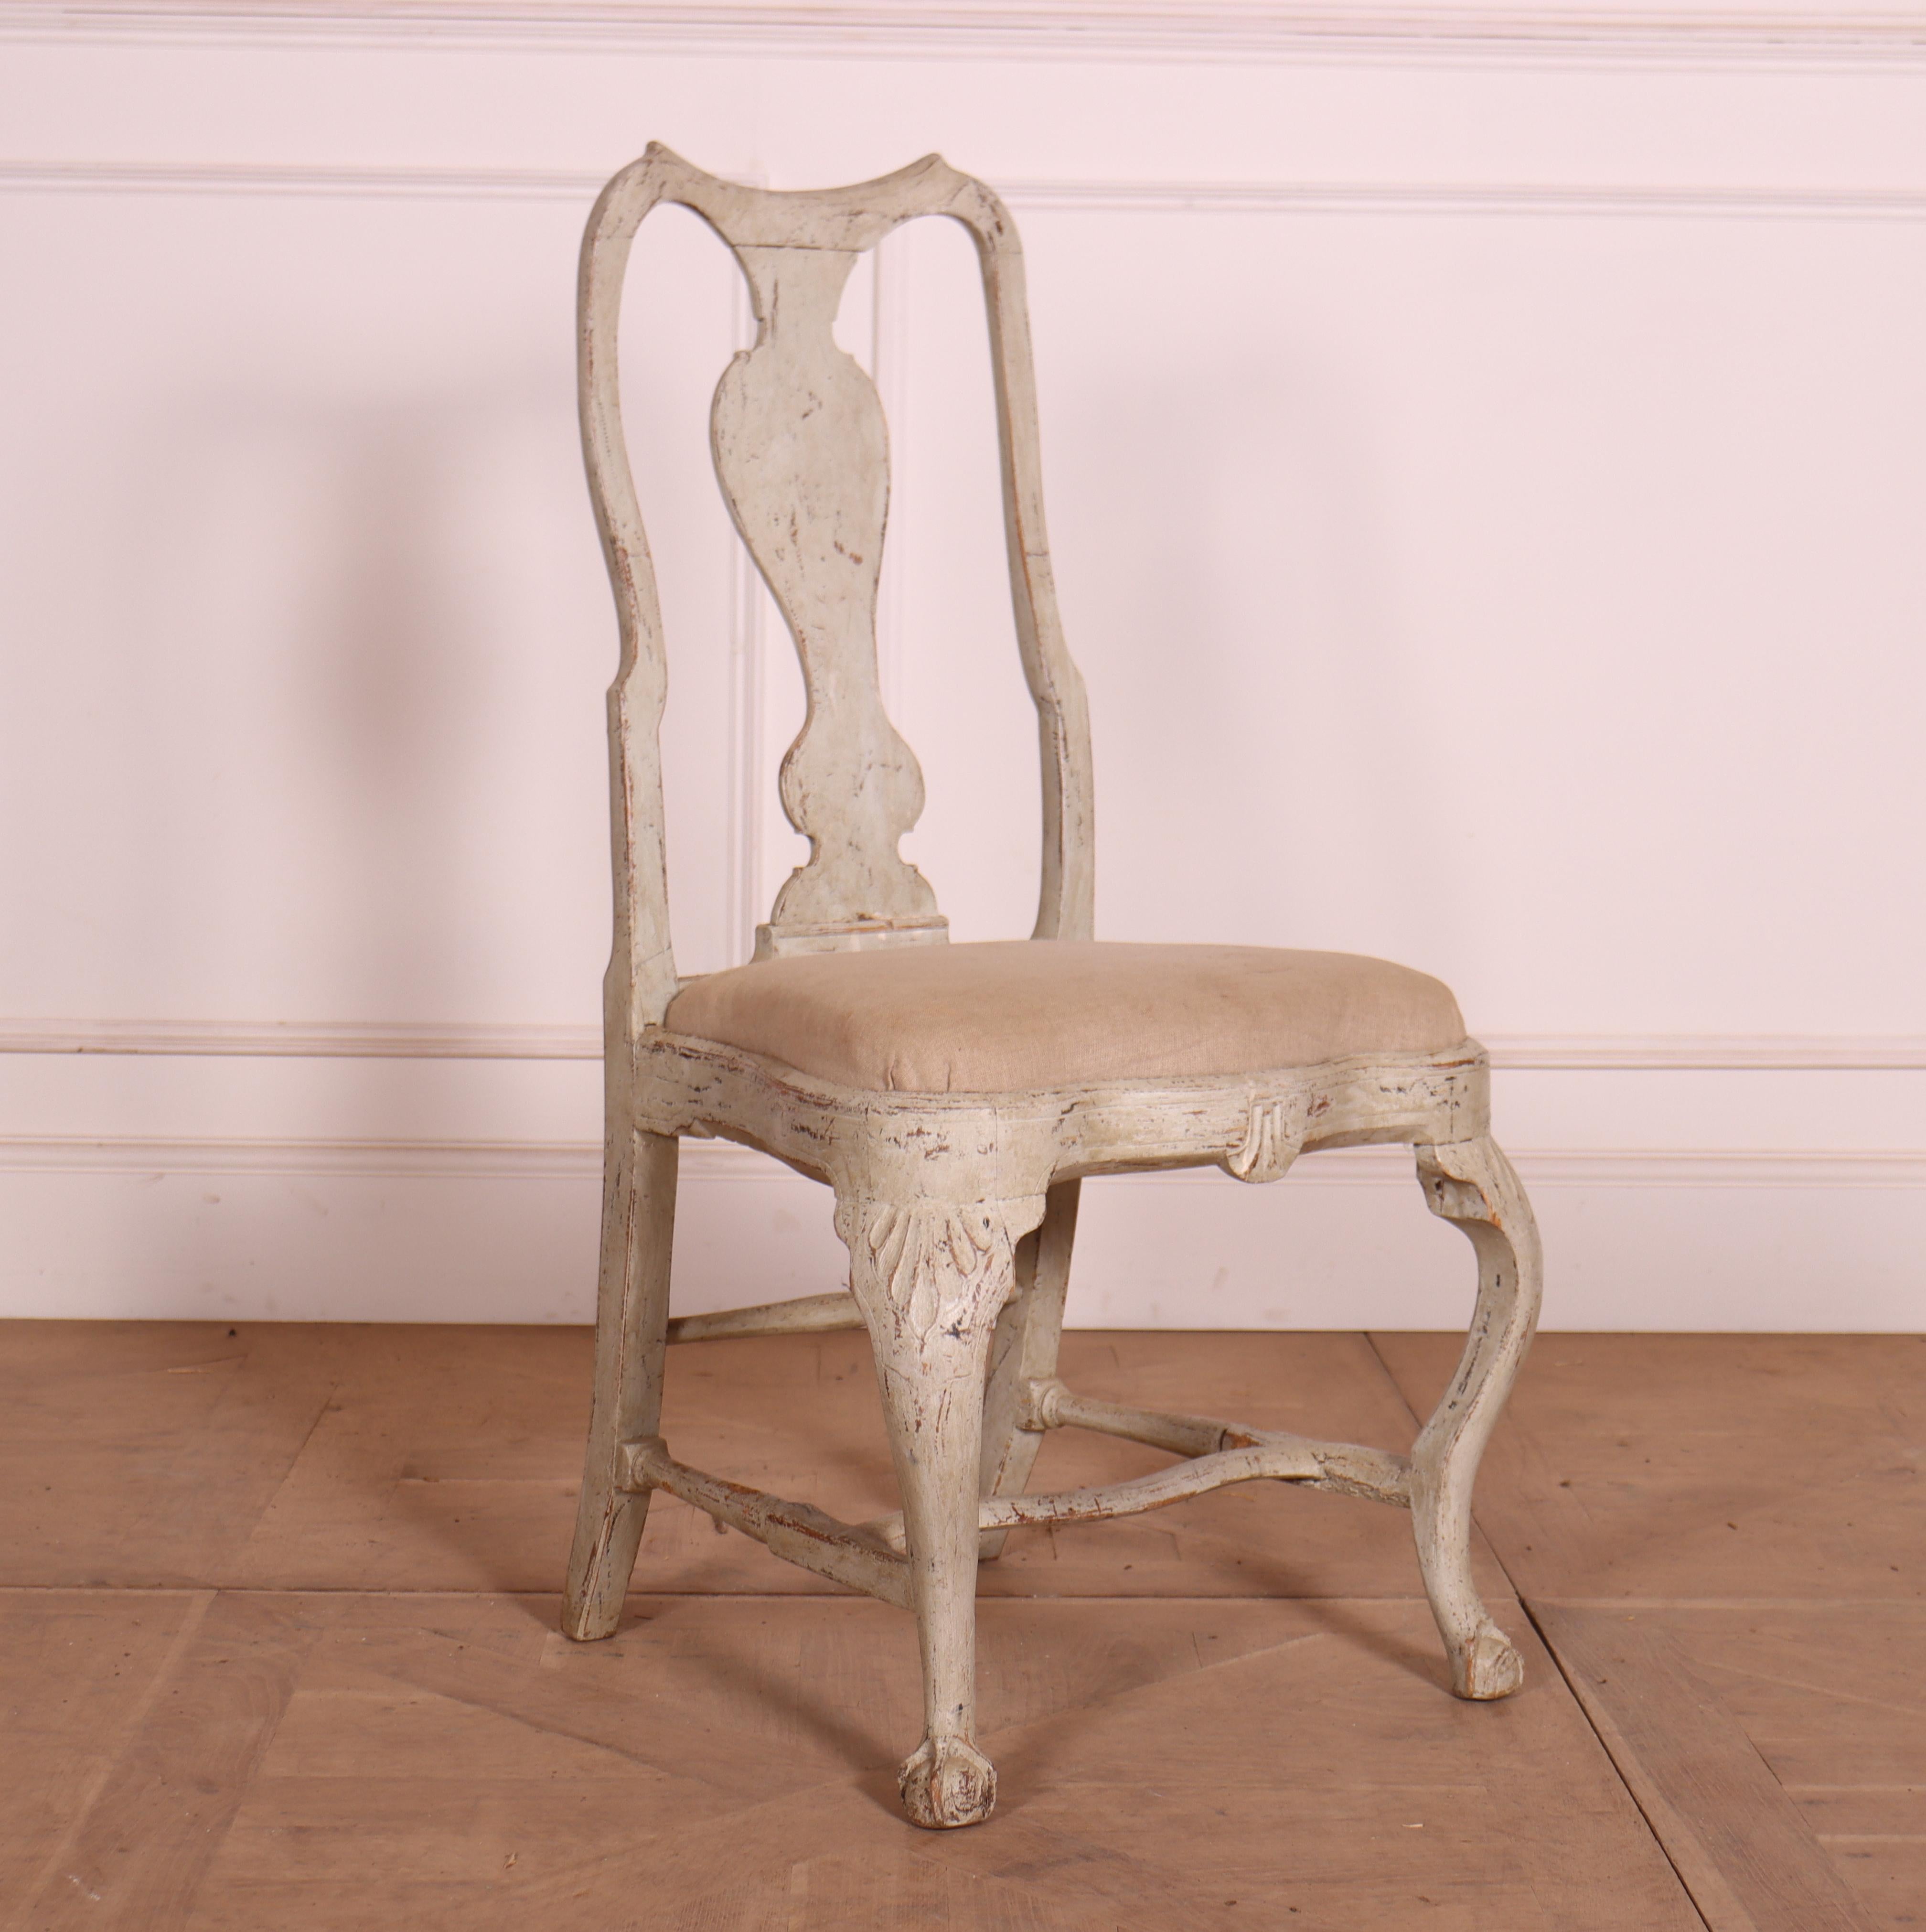 Set of 8 early 19th century Swedish Gustavian dining chairs. 1810.

Measures: Seat height is 19